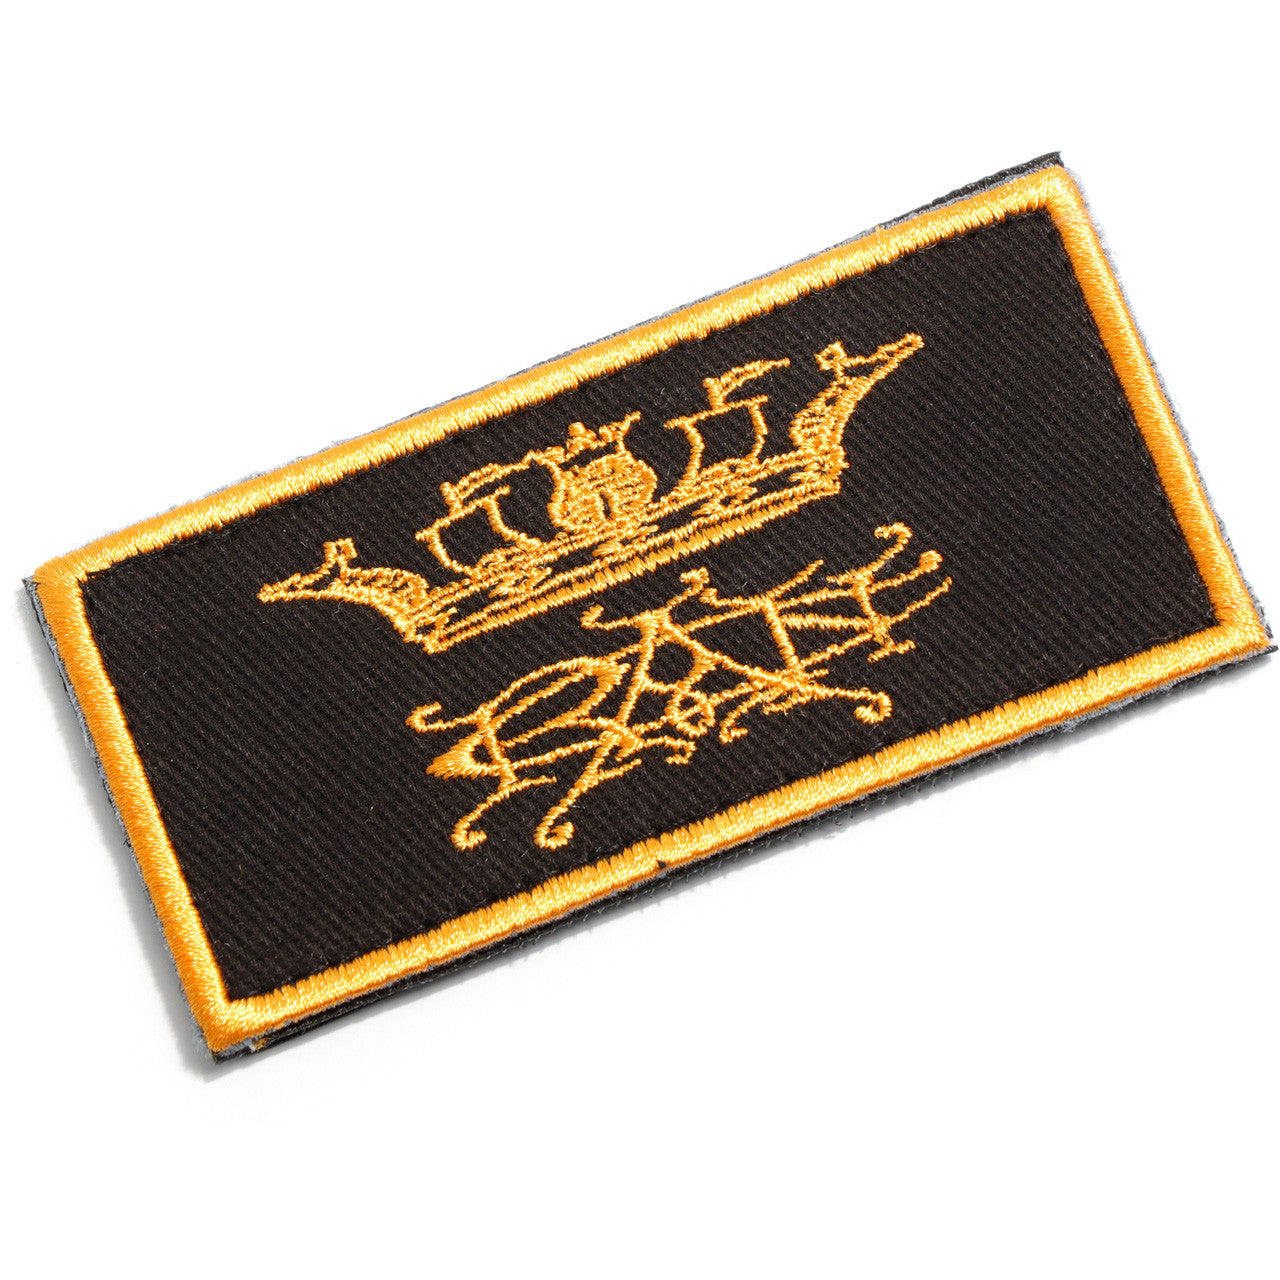 The HMAS Creswell DPNU Patch is a must-have for all naval enthusiasts. This embroidered patch features the iconic HMAS Creswell logo in black and yellow, adding a touch of style to any outfit or accessory. With its convenient hook-and-loop backing, it can be easily attached to clothing, bags, or hats. Show your support for the HMAS Creswell with this high-quality patch. www.defenceqstore.com.au